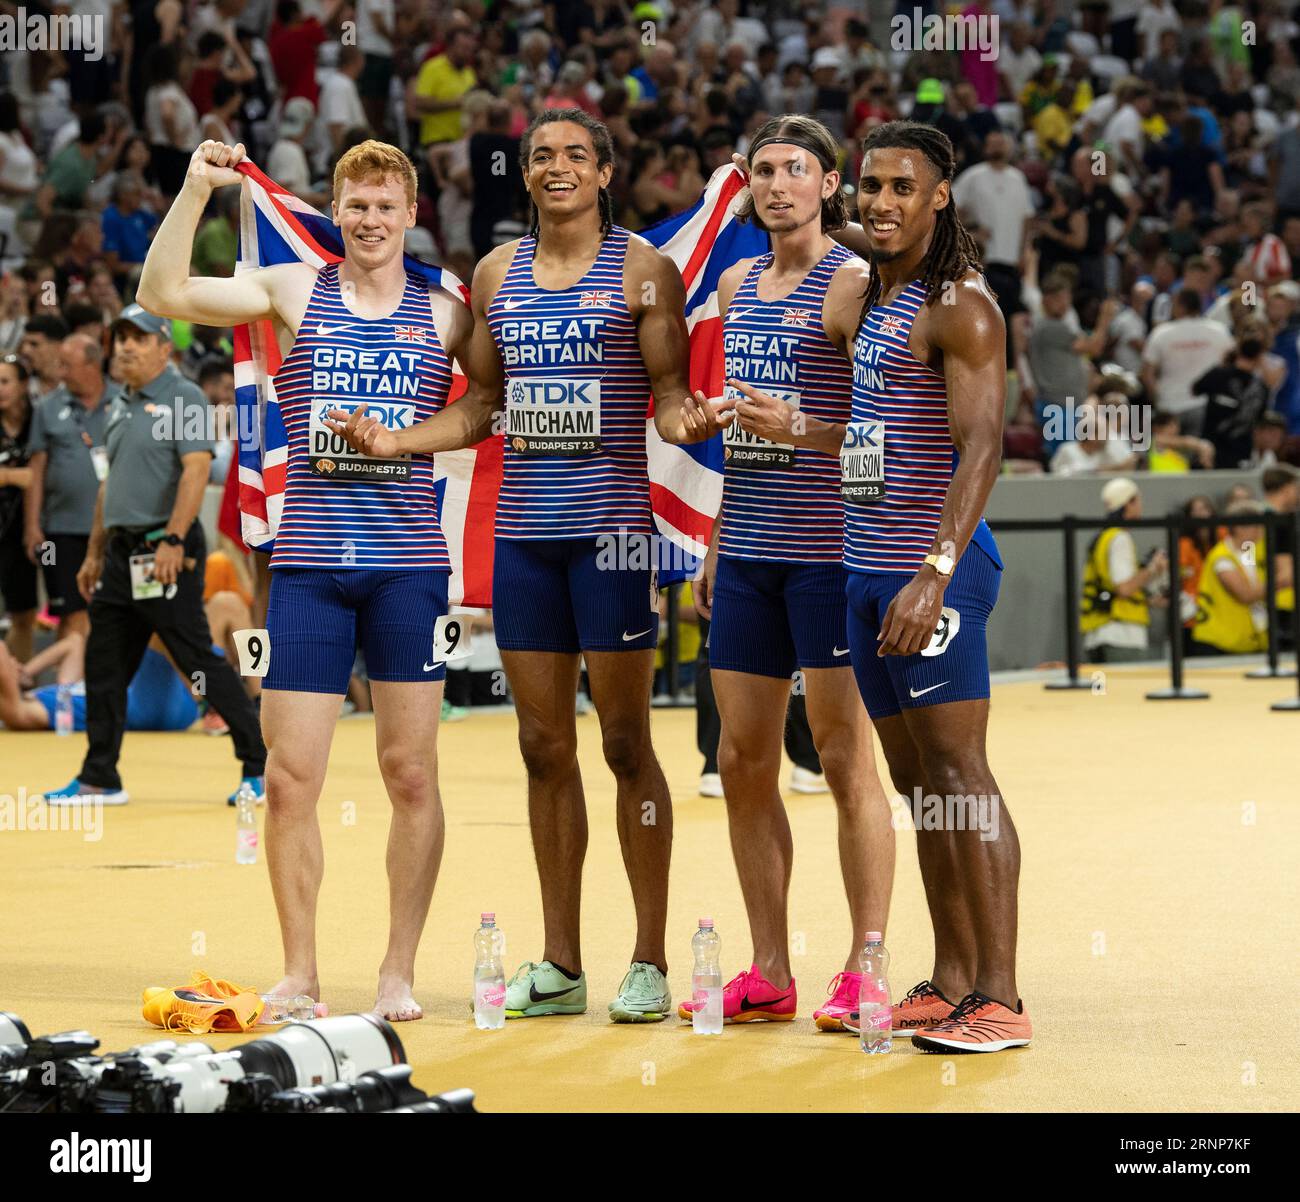 Charles Dobson, Rio Mitcham, Lewis Davey and Alex Haydock-Wilson of GB & NI competing in the men’s 4x400m relay final on day 9 of the World Athletics Stock Photo